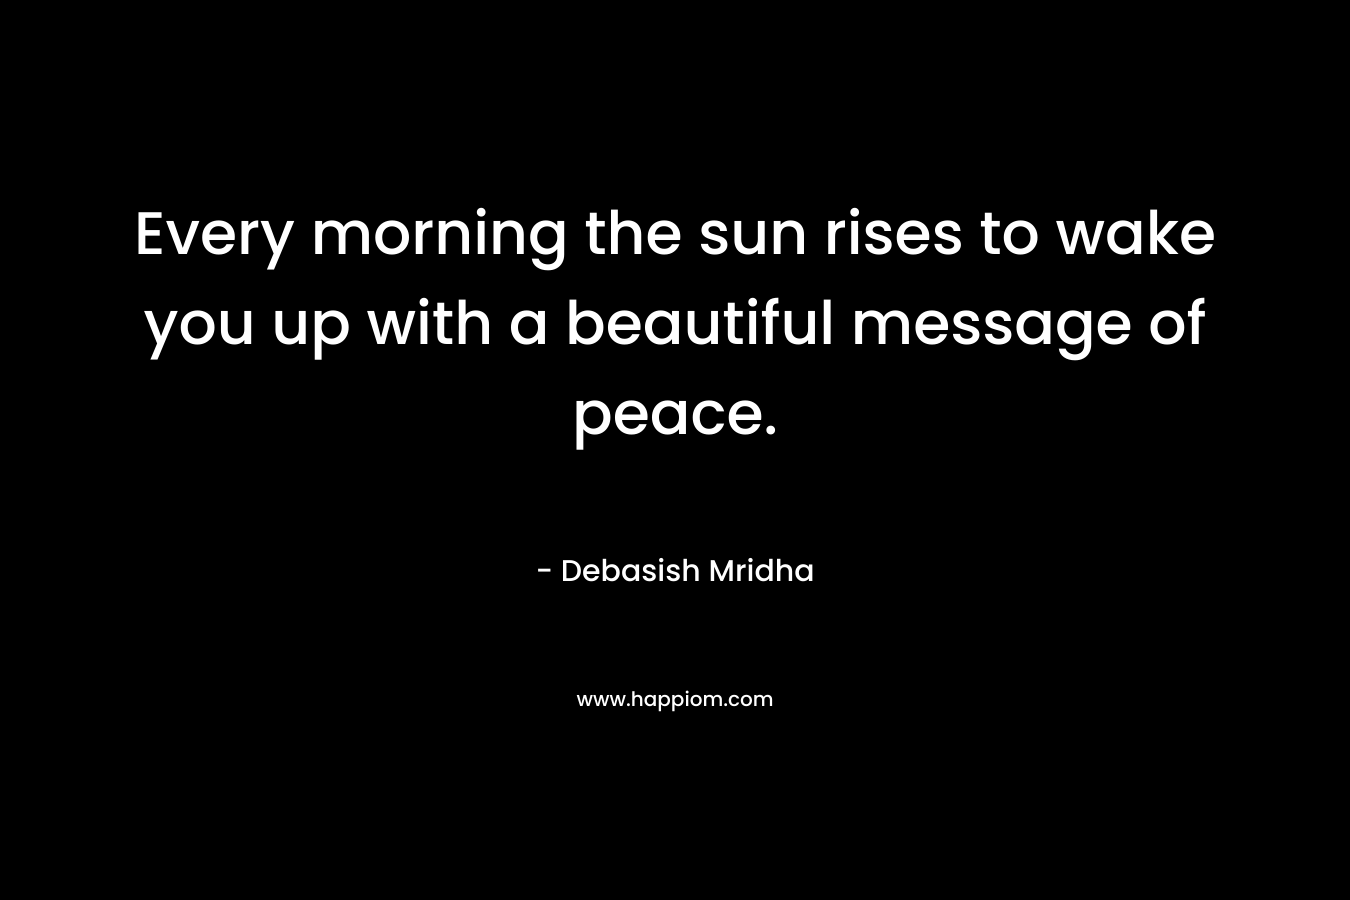 Every morning the sun rises to wake you up with a beautiful message of peace.